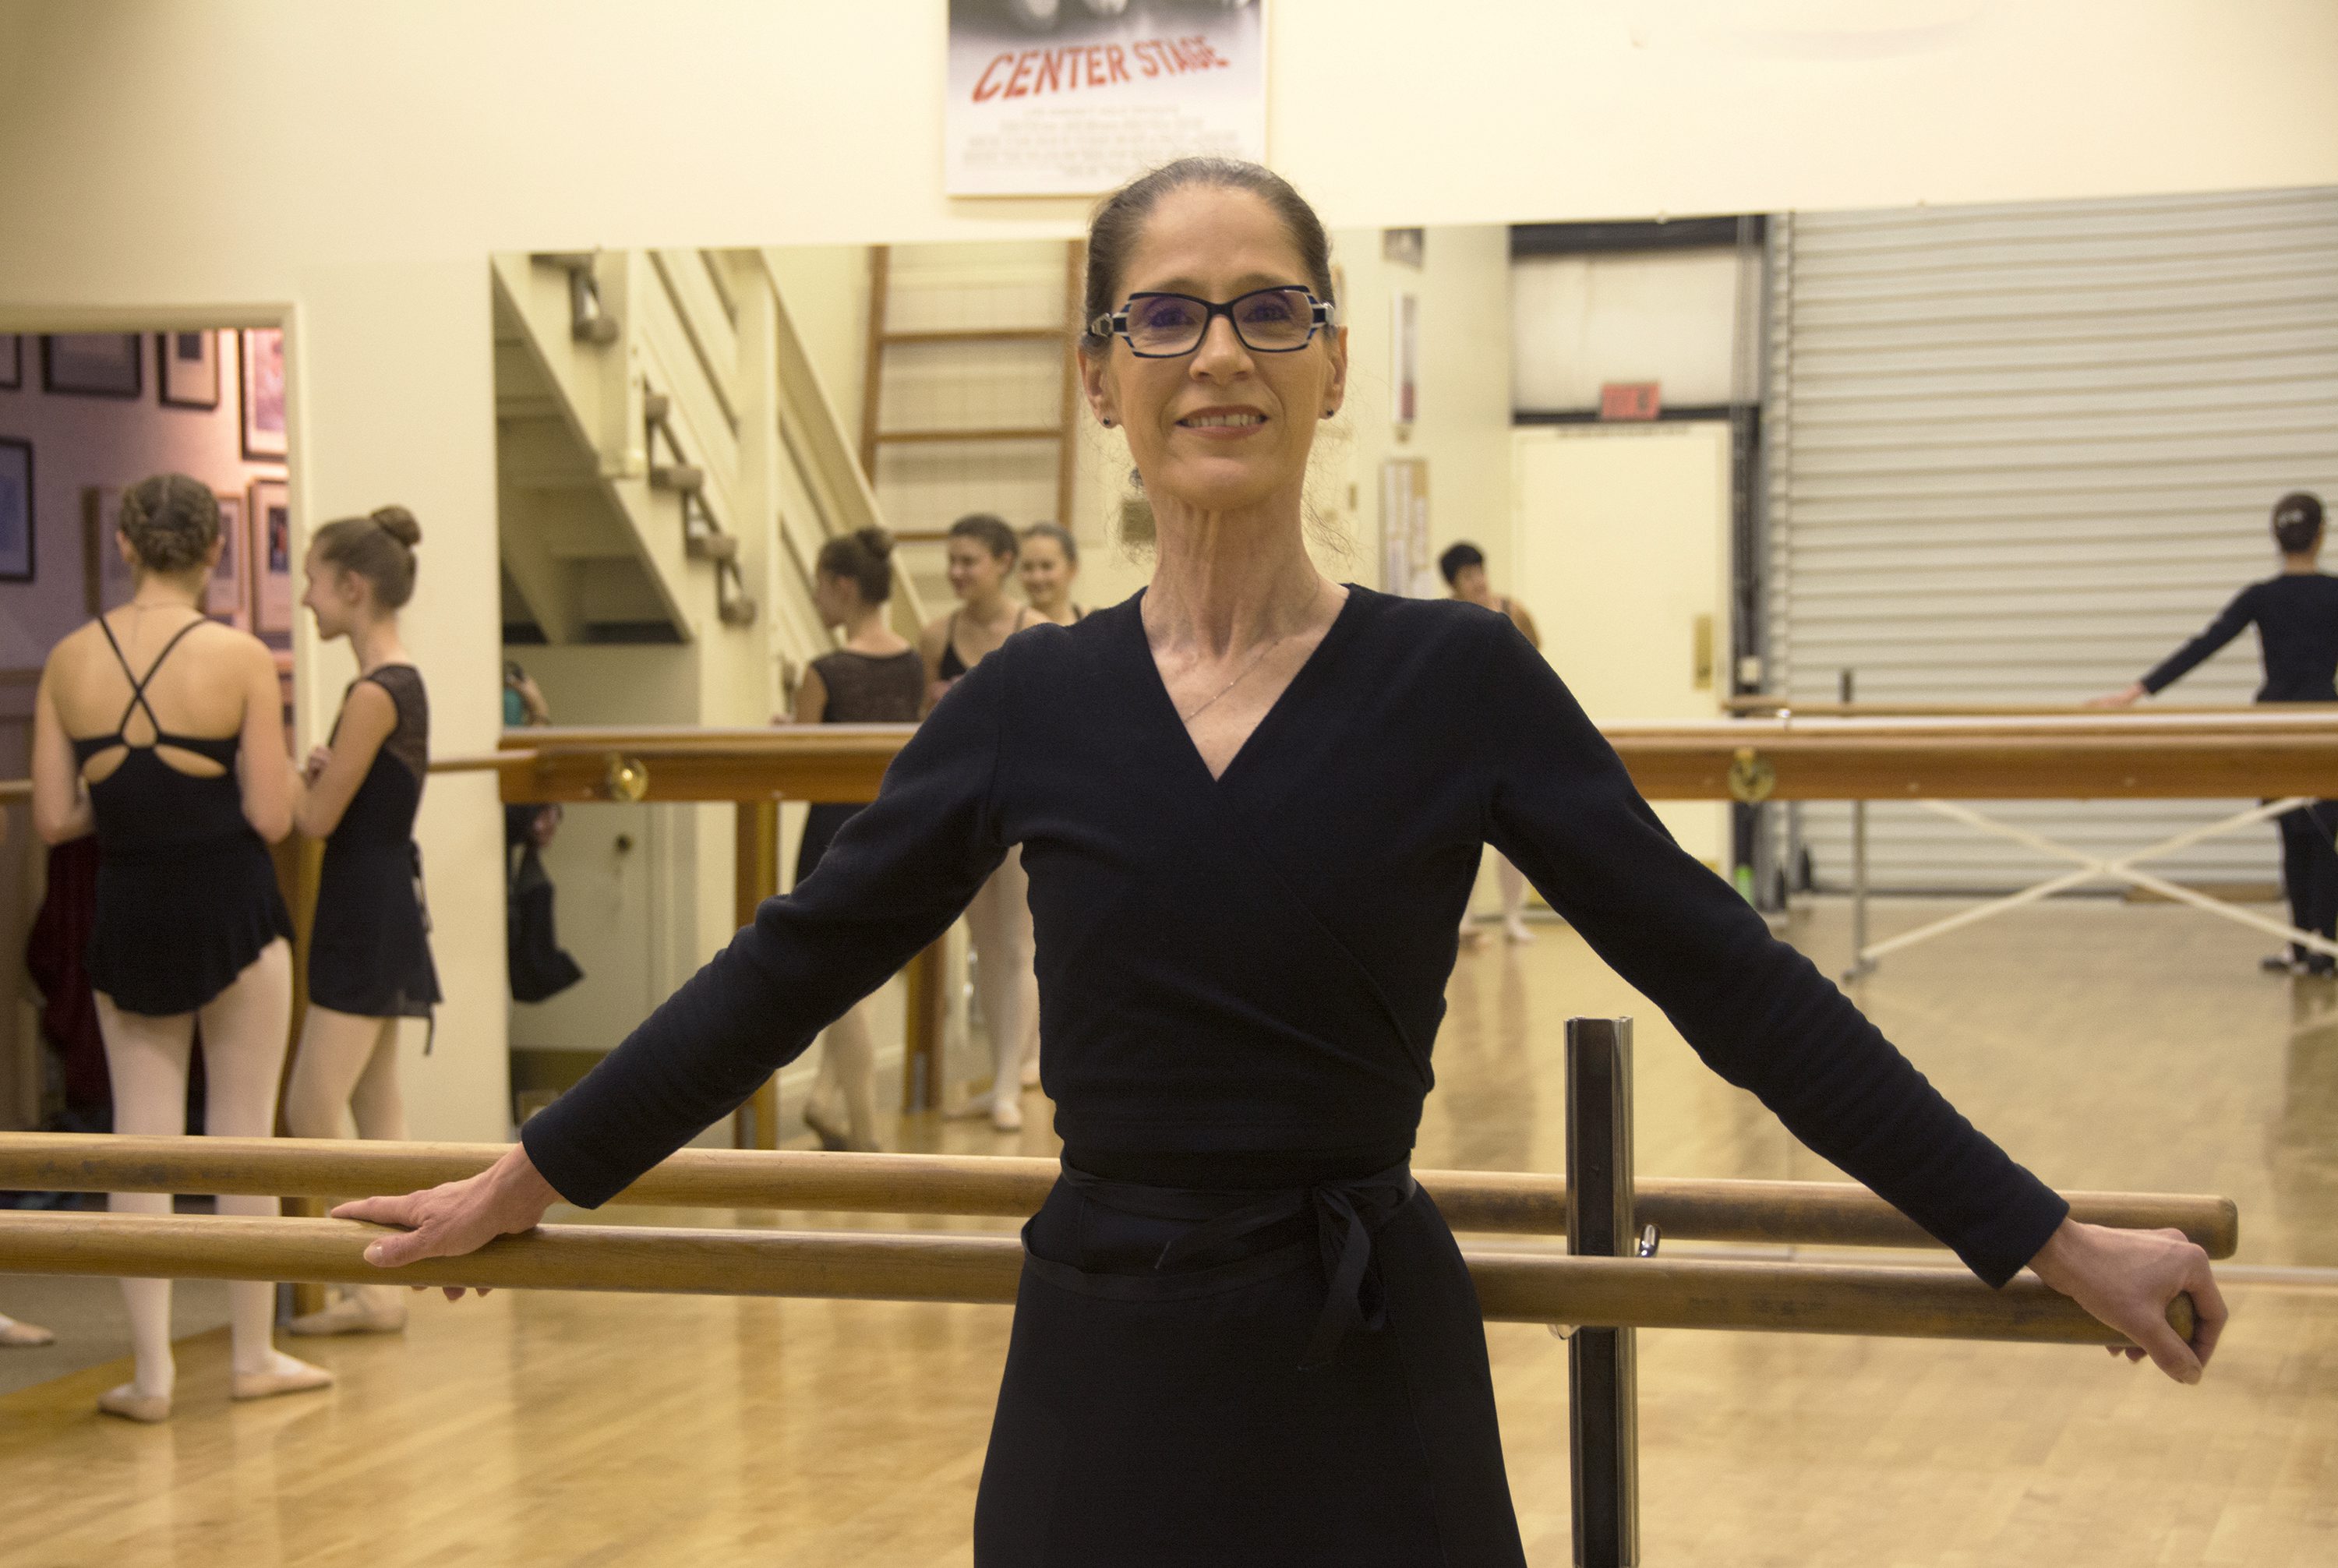 Christine Fossemalle says her work is a joy when students ‘want to learn the art of dance’